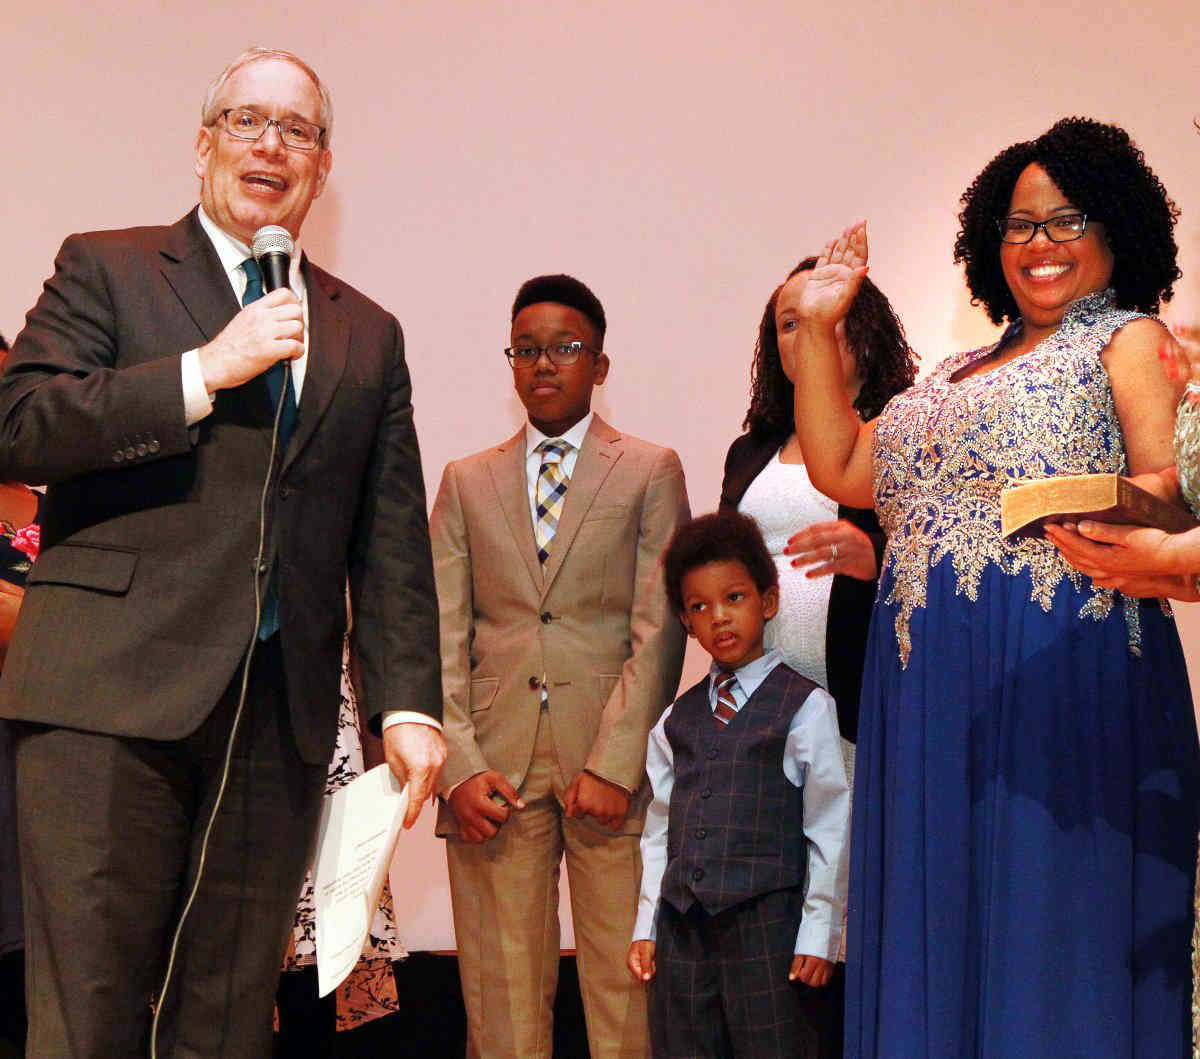 Feting Frontus: Pols, locals toast new Assemblywoman at Brighton Beach swearing-in ceremony